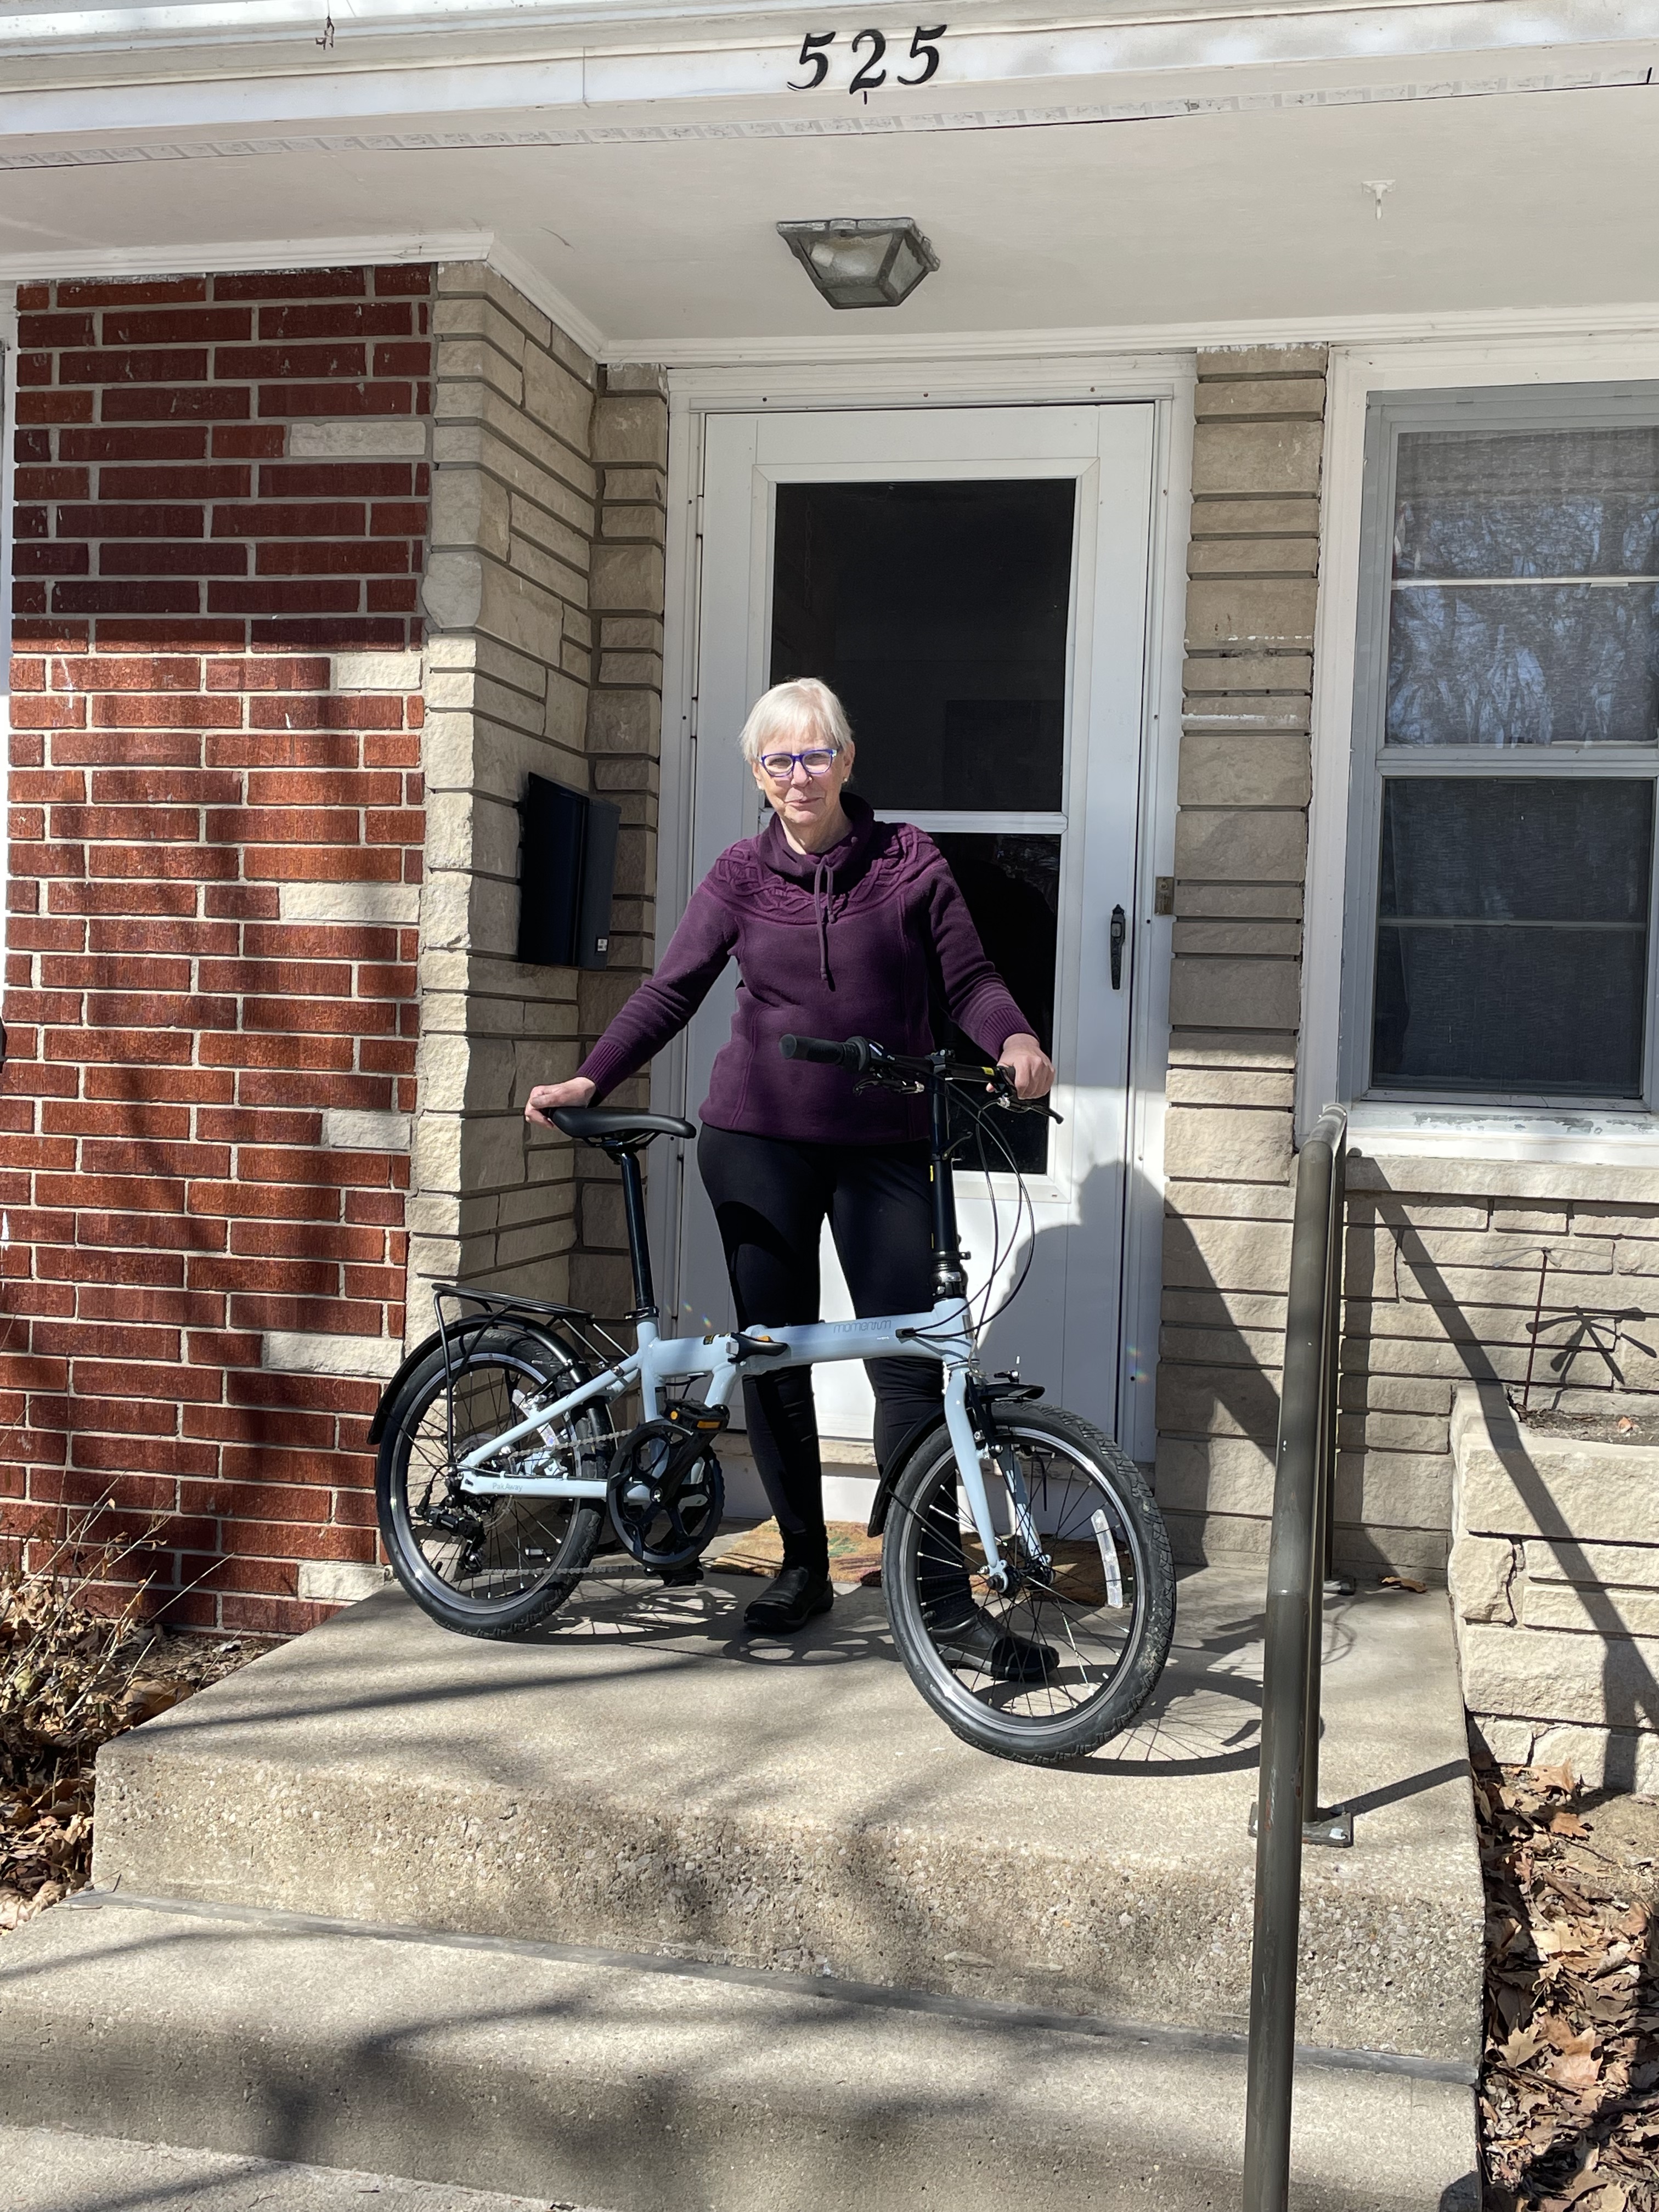 Margee stands on the front steps of a house. She is wearing a purple fleece and black athletic pants. She holds onto a powder blue foldable bike.